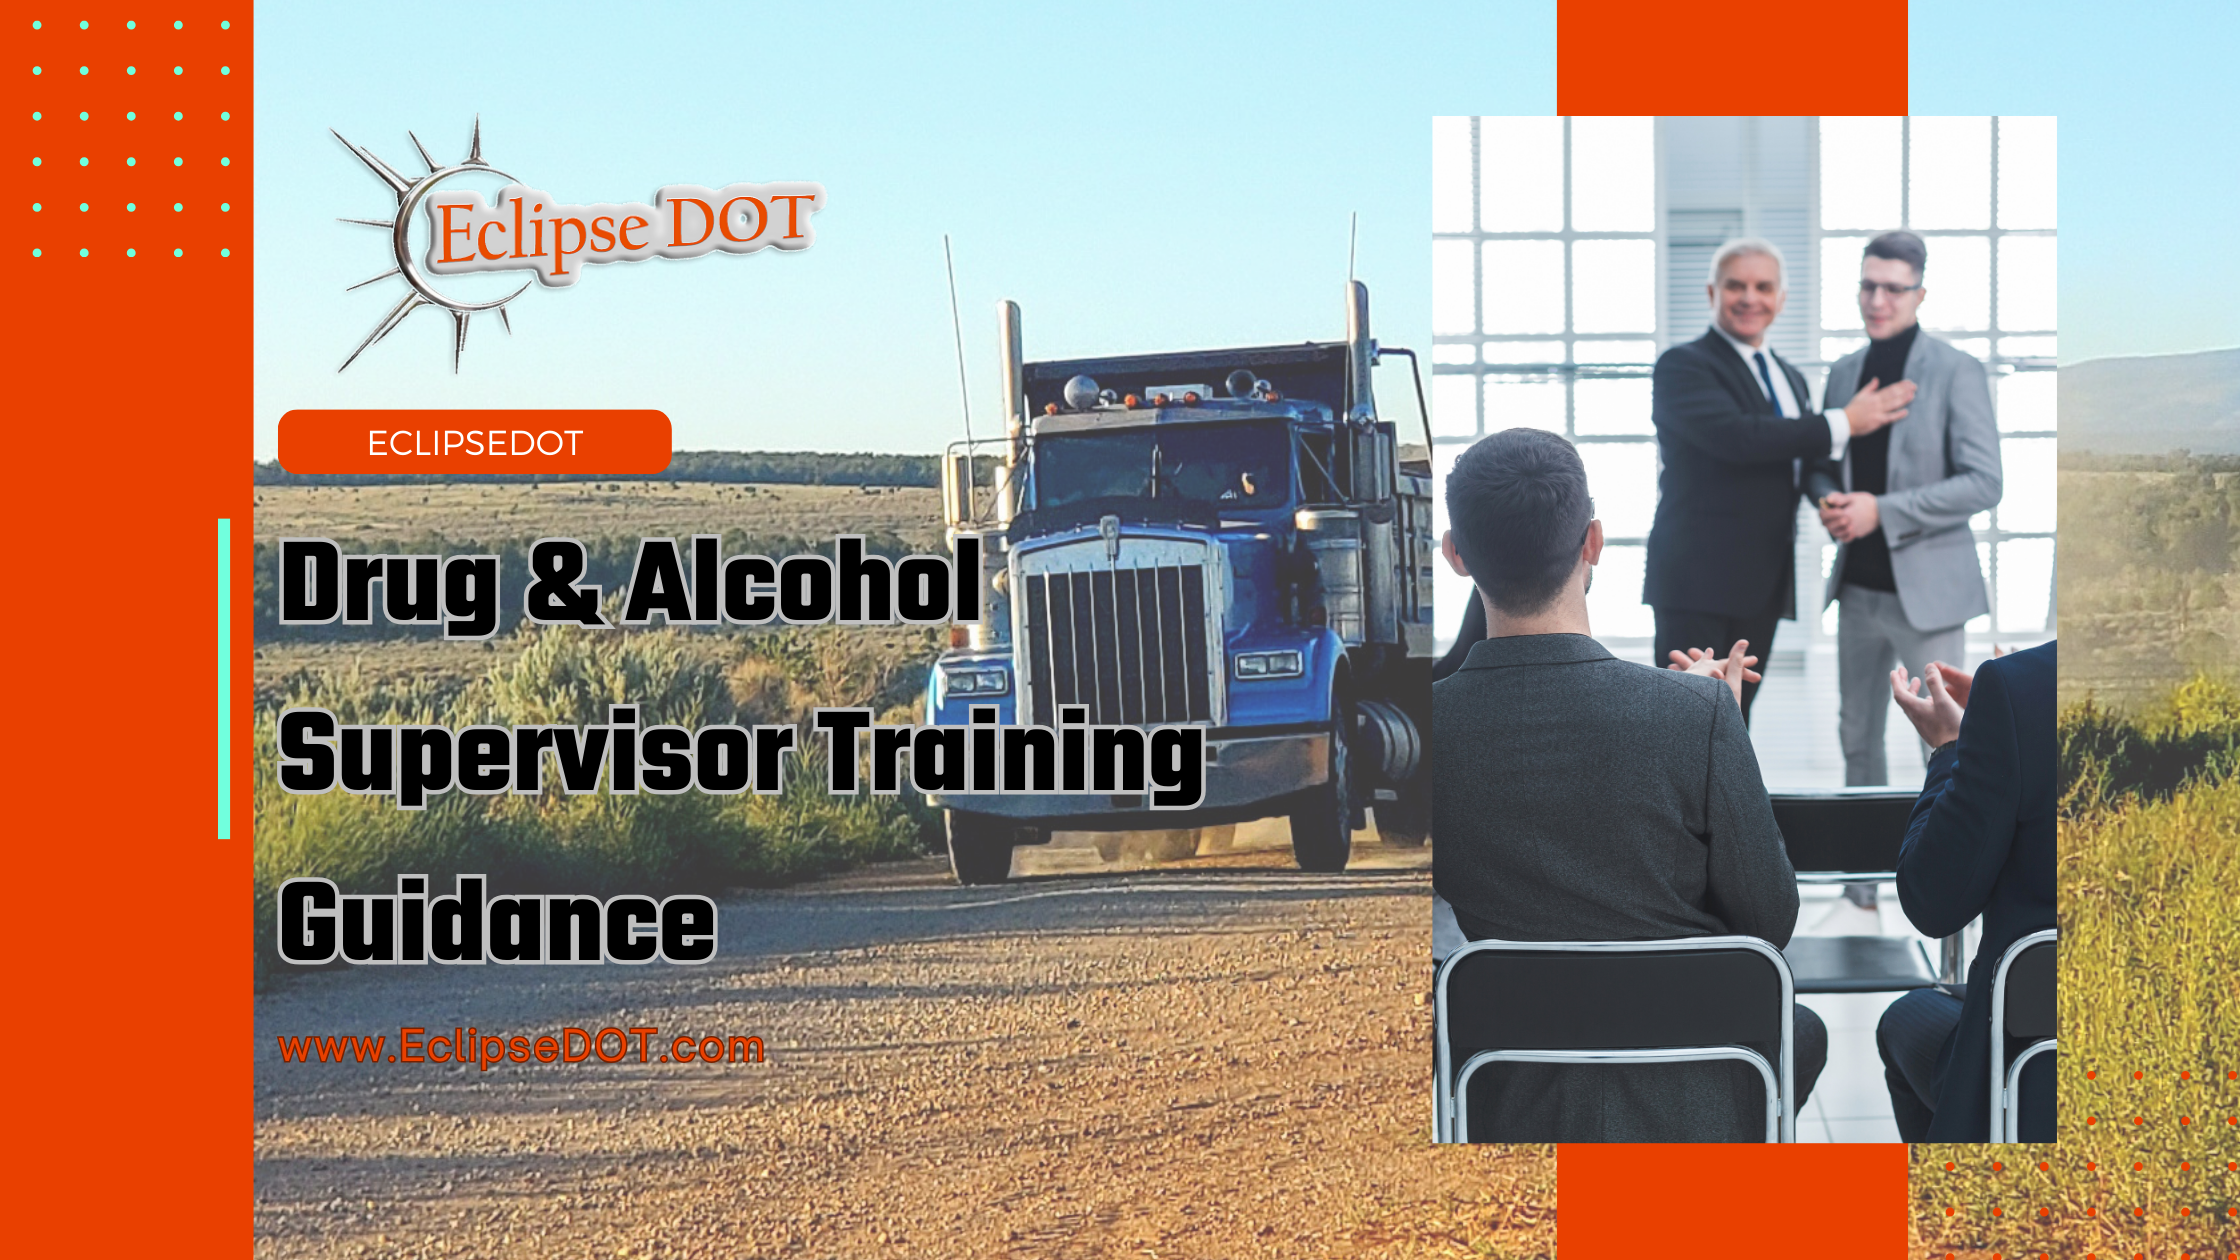 Image showing a supervisor conducting drug and alcohol training for employees.